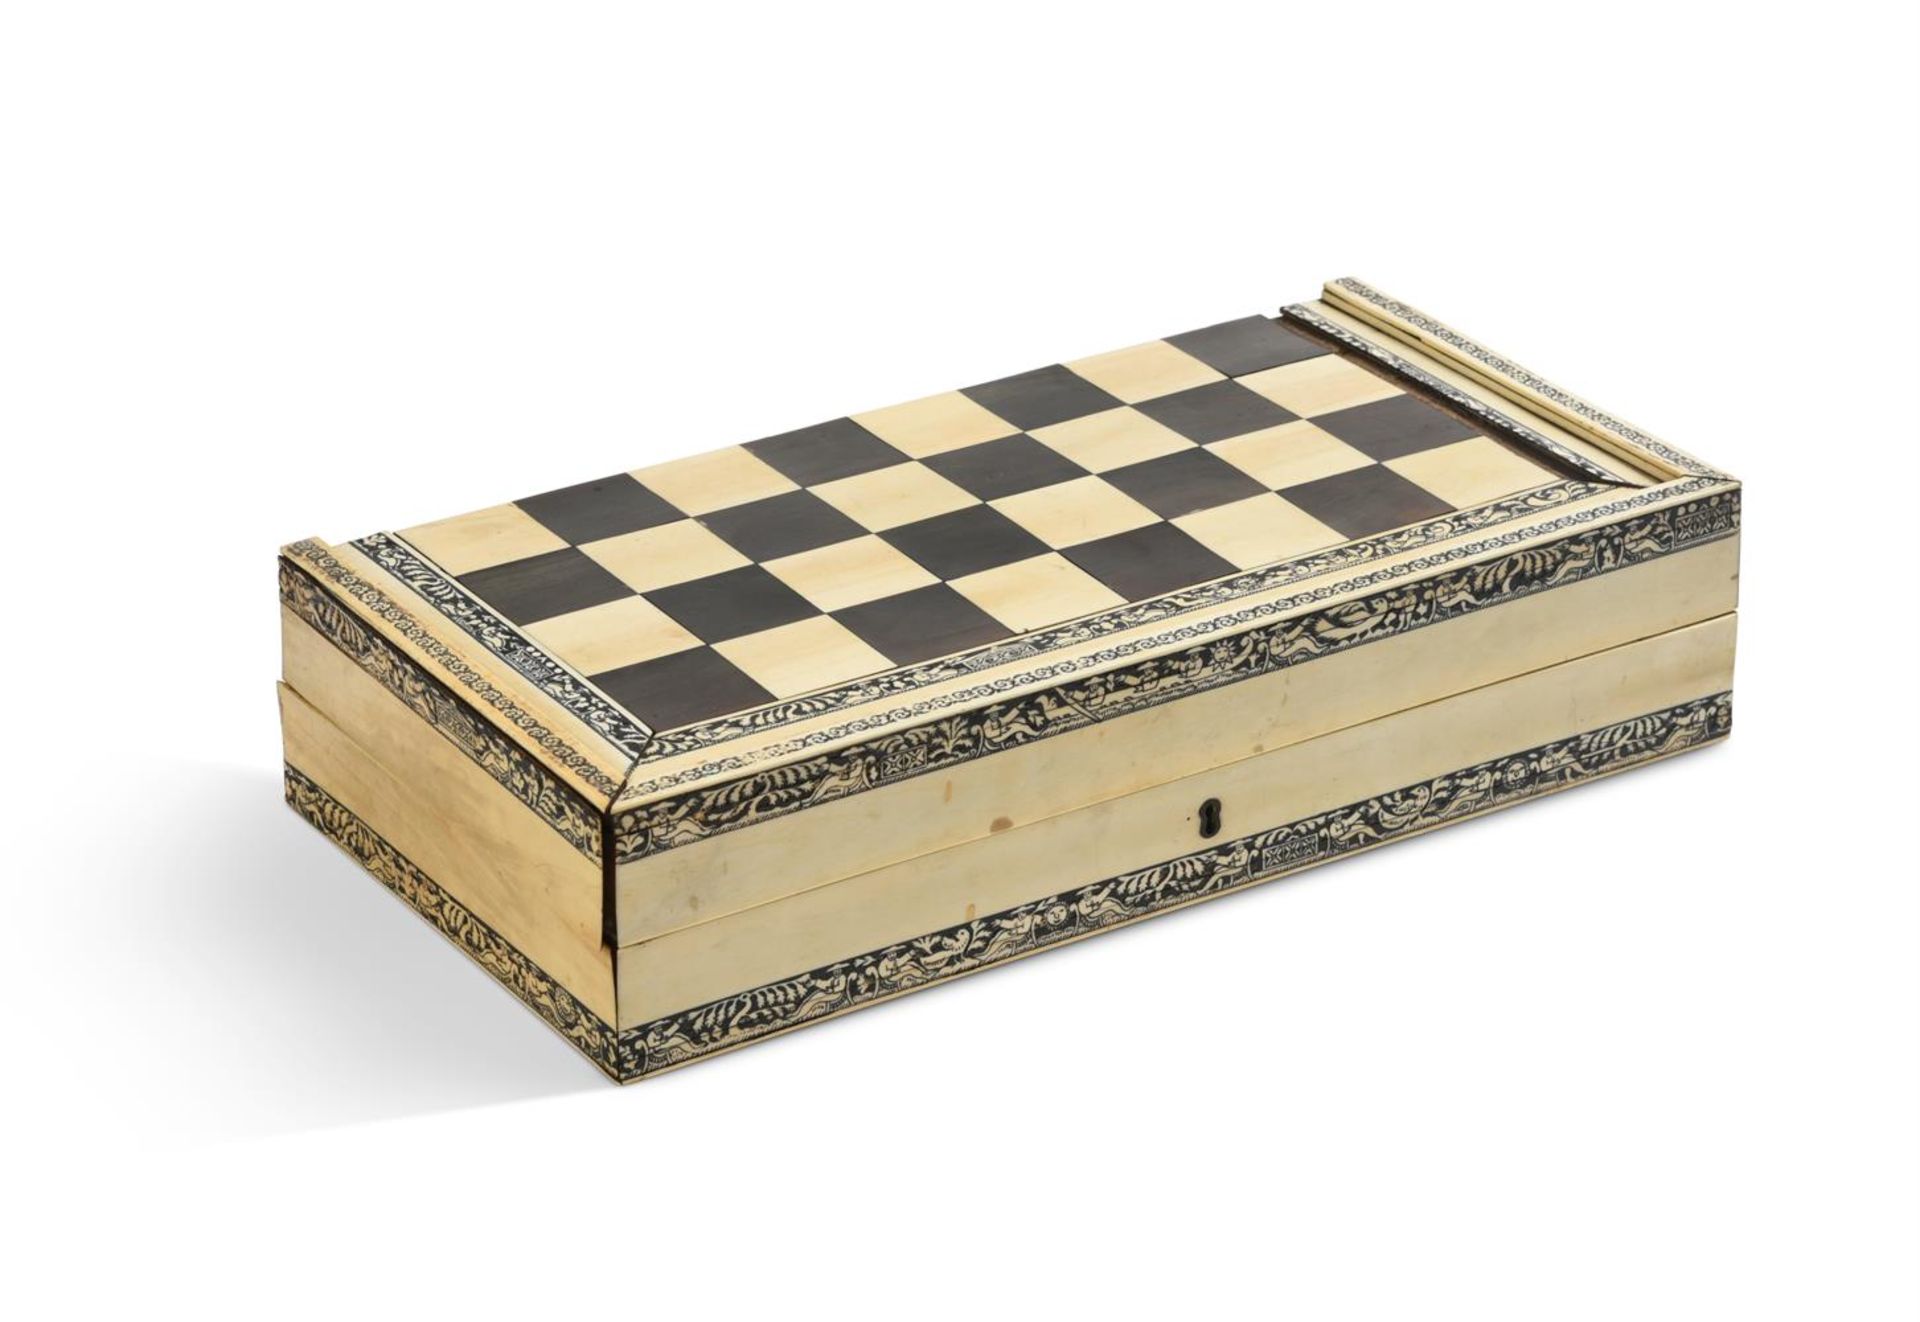 Y AN ANGLO-INDIAN PENWORK AND PARQUETRY IVORY GAMES BOX, VIZAGAPATAM, MID 19TH CENTURY - Image 3 of 3